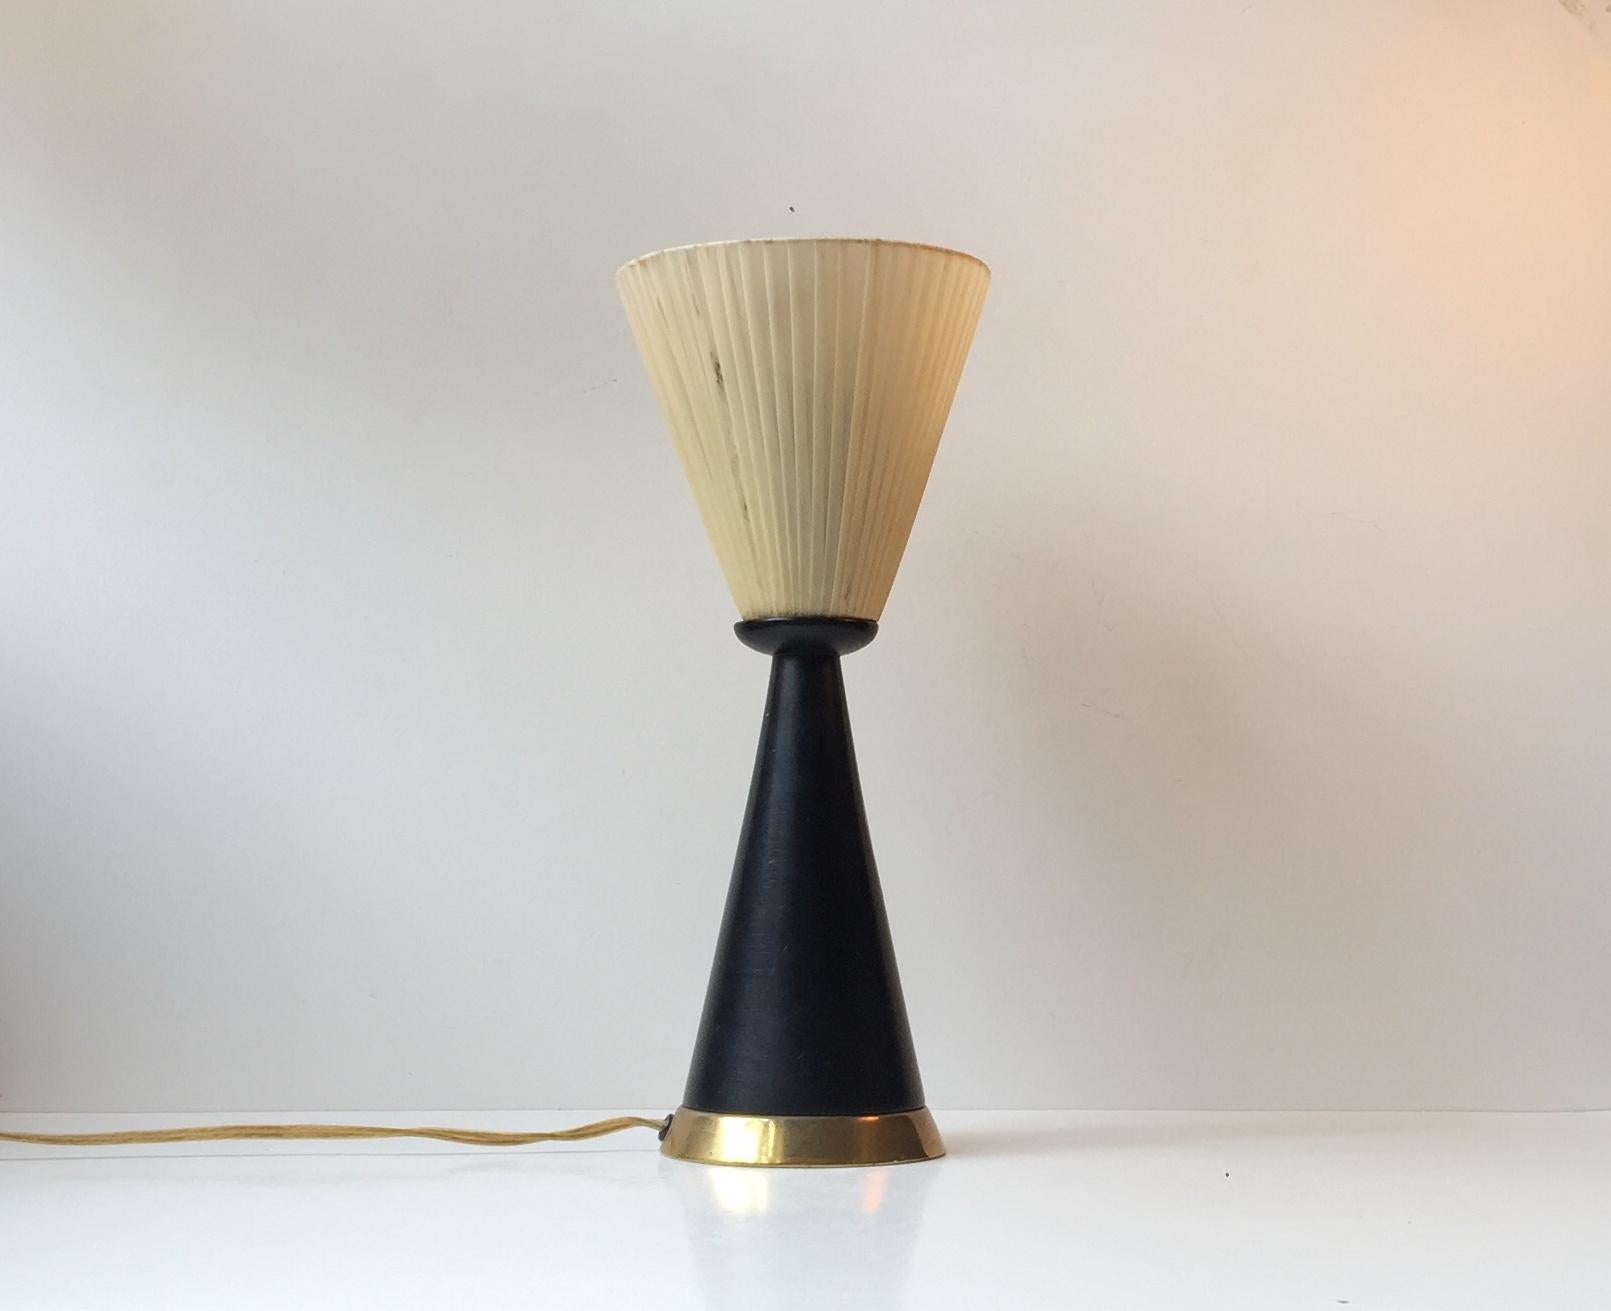 Diablo table light composed of a black lacquered wooden cone, a brass base and a fabric wrapped conical shade. It was manufactured in Italy during the 1960s in a style reminiscent of Stilnovo and Svend Aage Holm Sørensen. Please notice that’s there